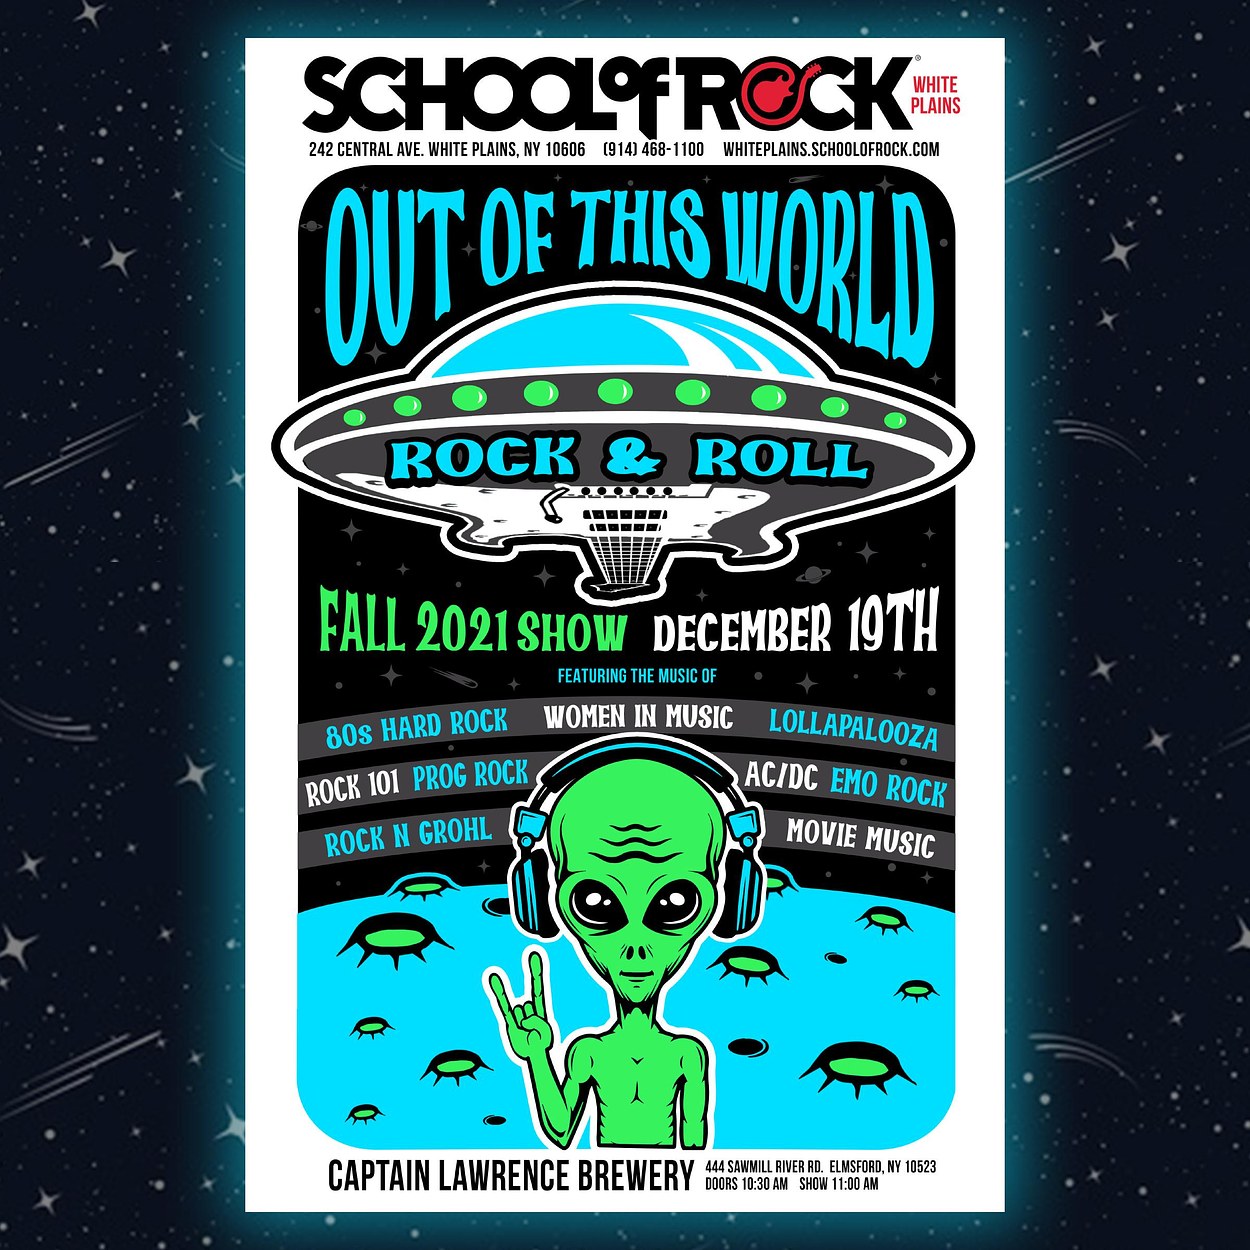 School Of Rock White Plains - End of Season Fall 2021 Show Poster